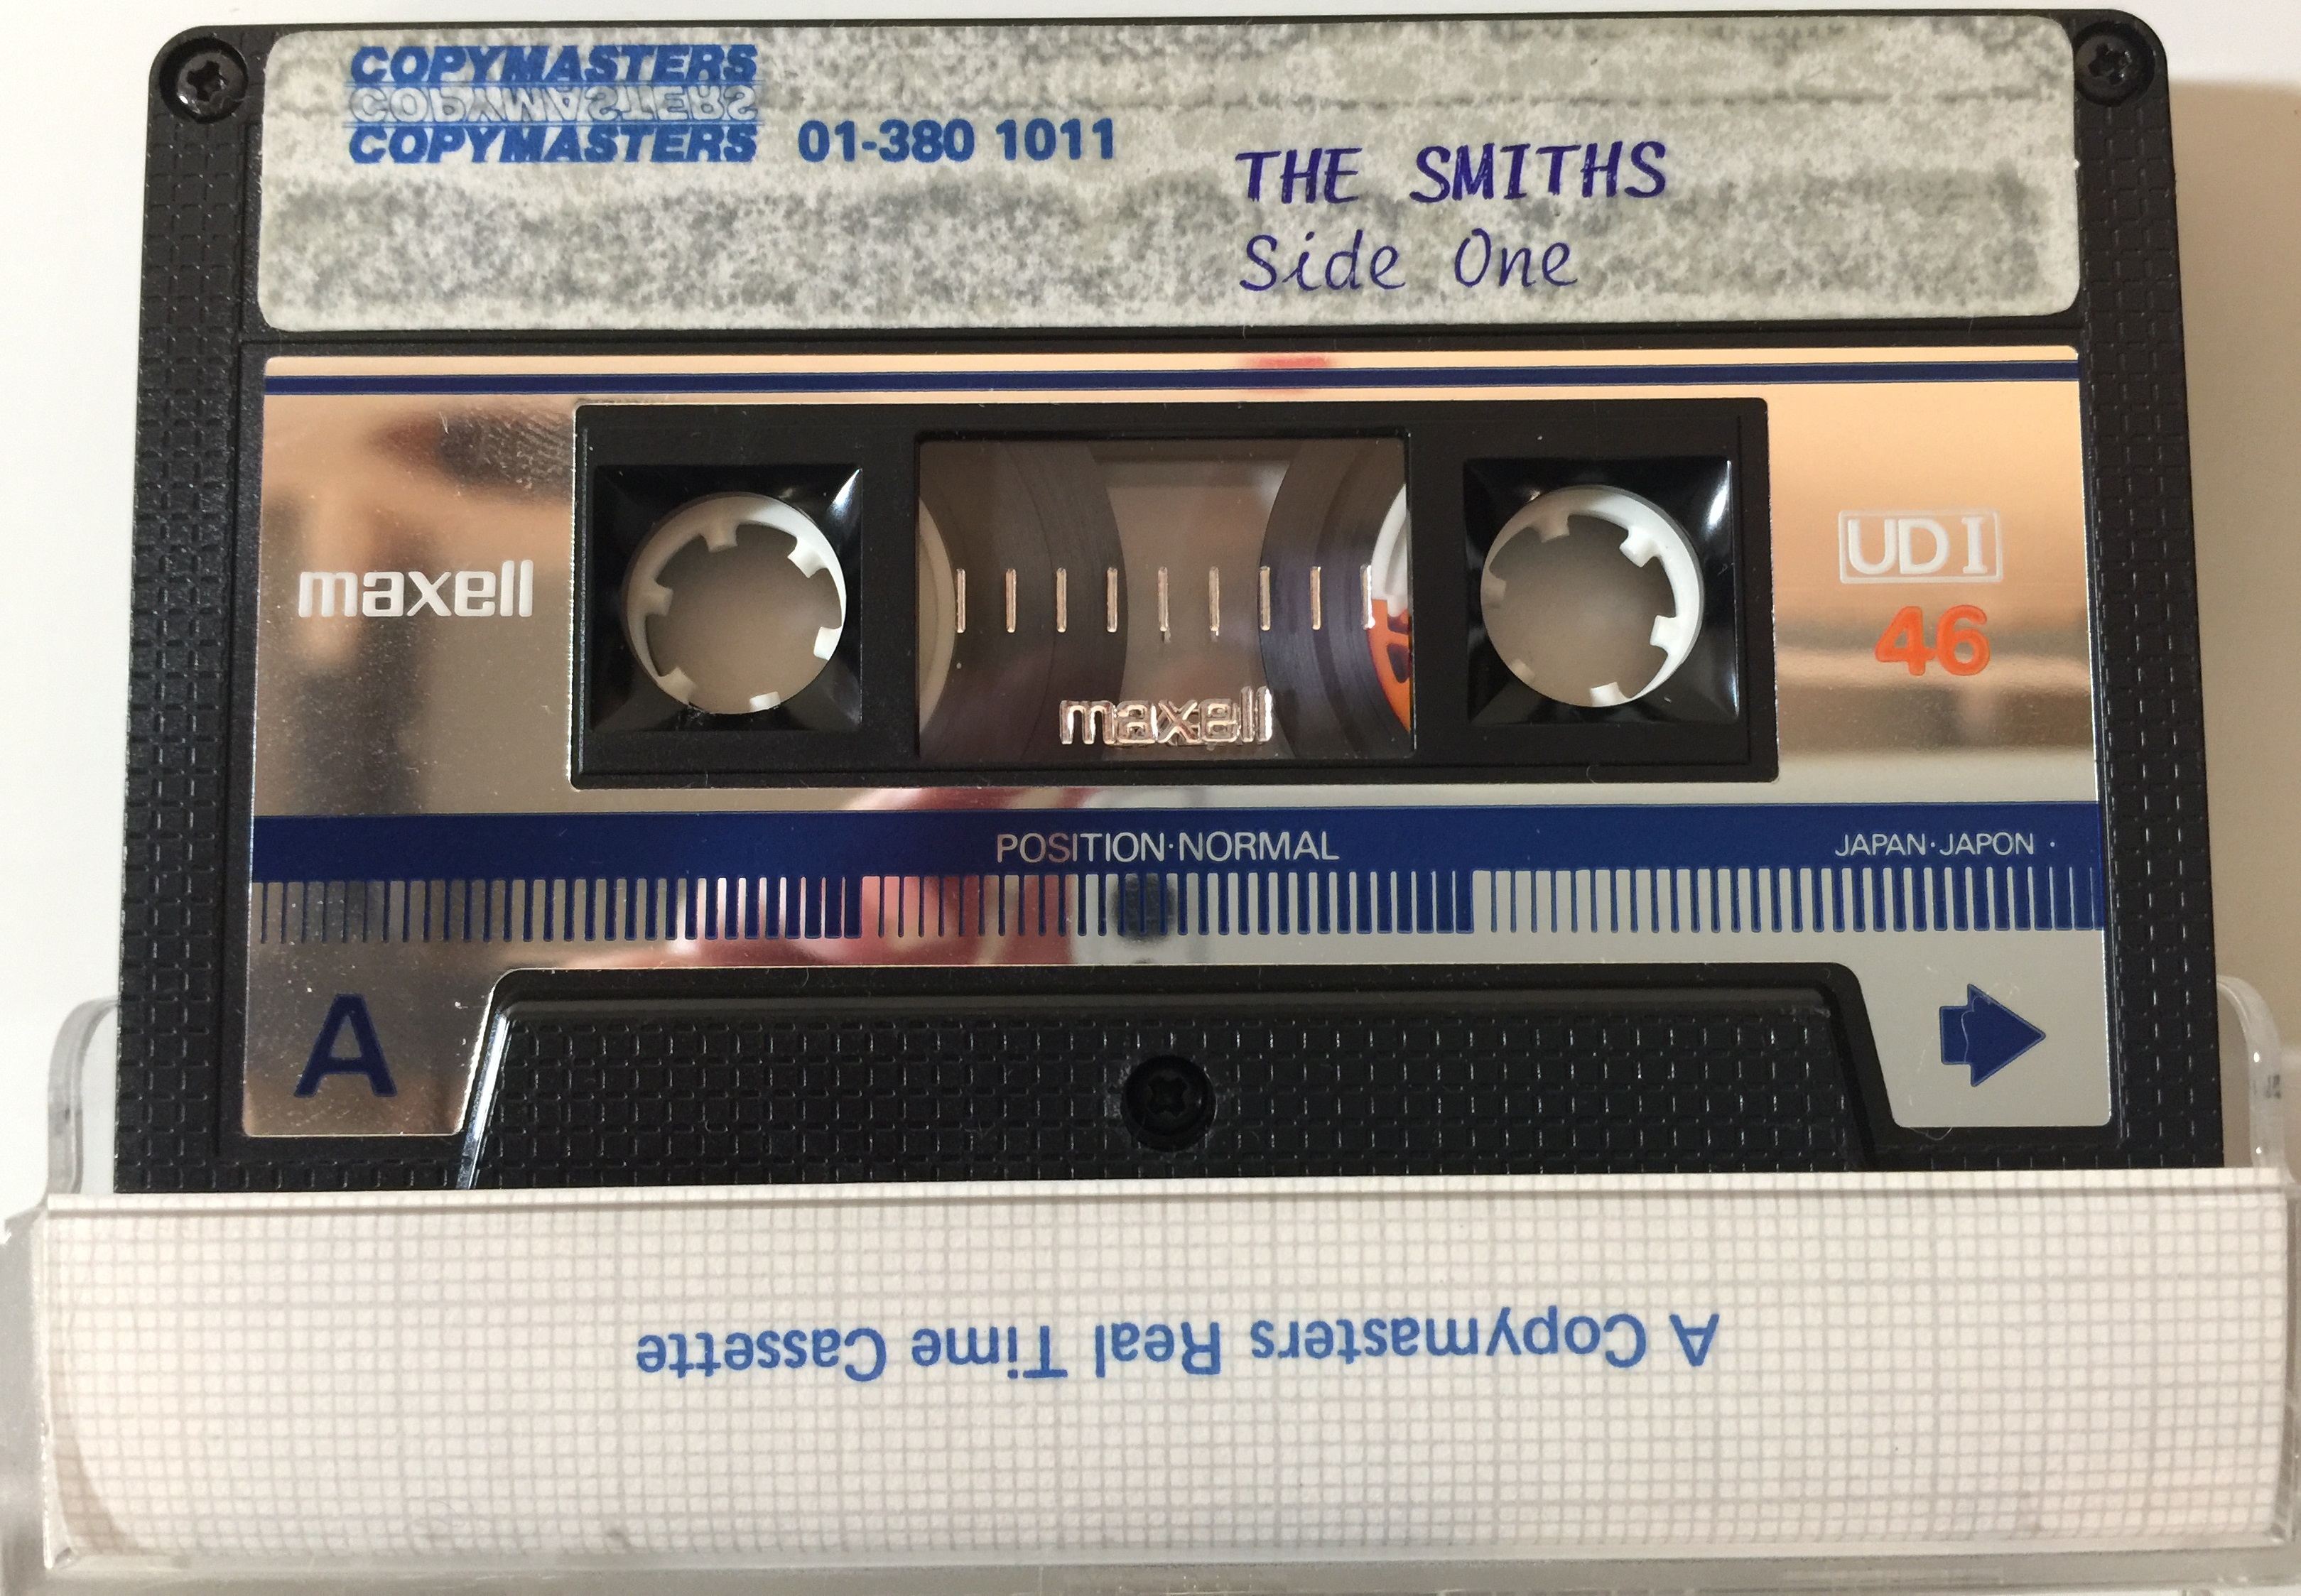 THE SMITHS - STRANGEWAYS HERE WE COME - COPYMASTERS DEMO CASSETTE. - Image 2 of 4